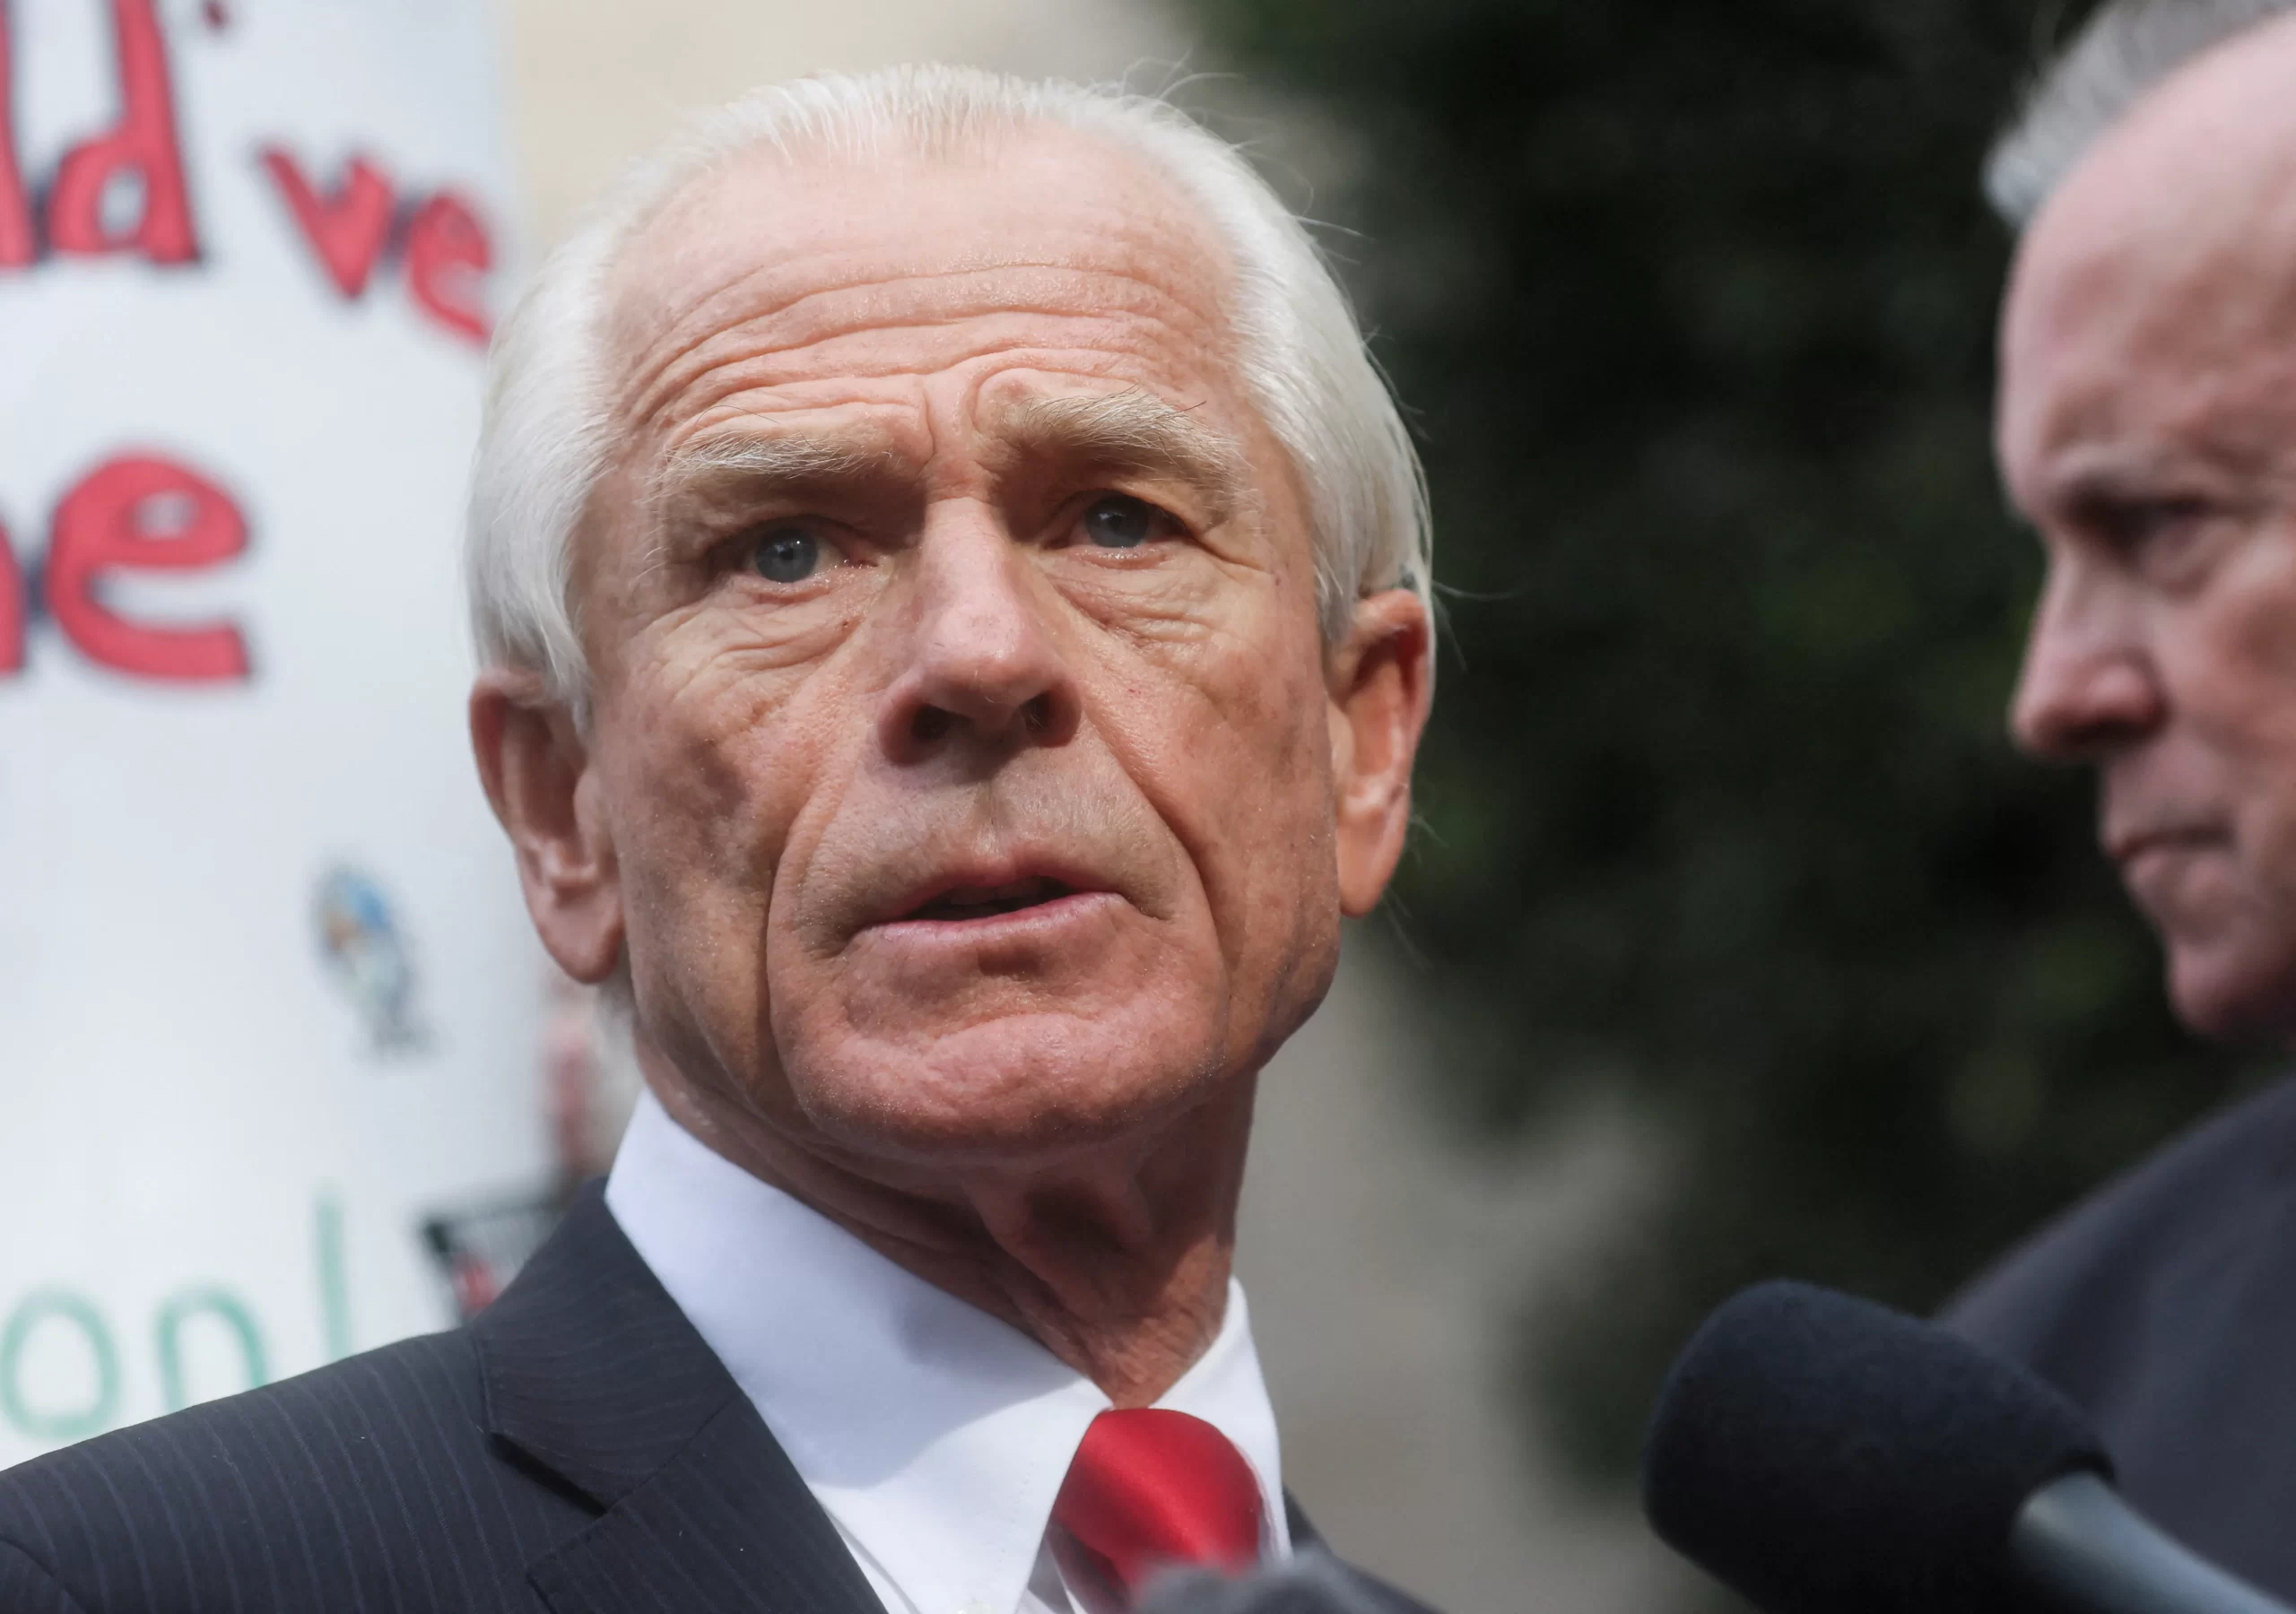 Peter Navarro, a Former Adviser to Donald Trump, is Set to Face Sentencing for Contempt of Congress in Connection to the House Investigation Into the Events of January 6th